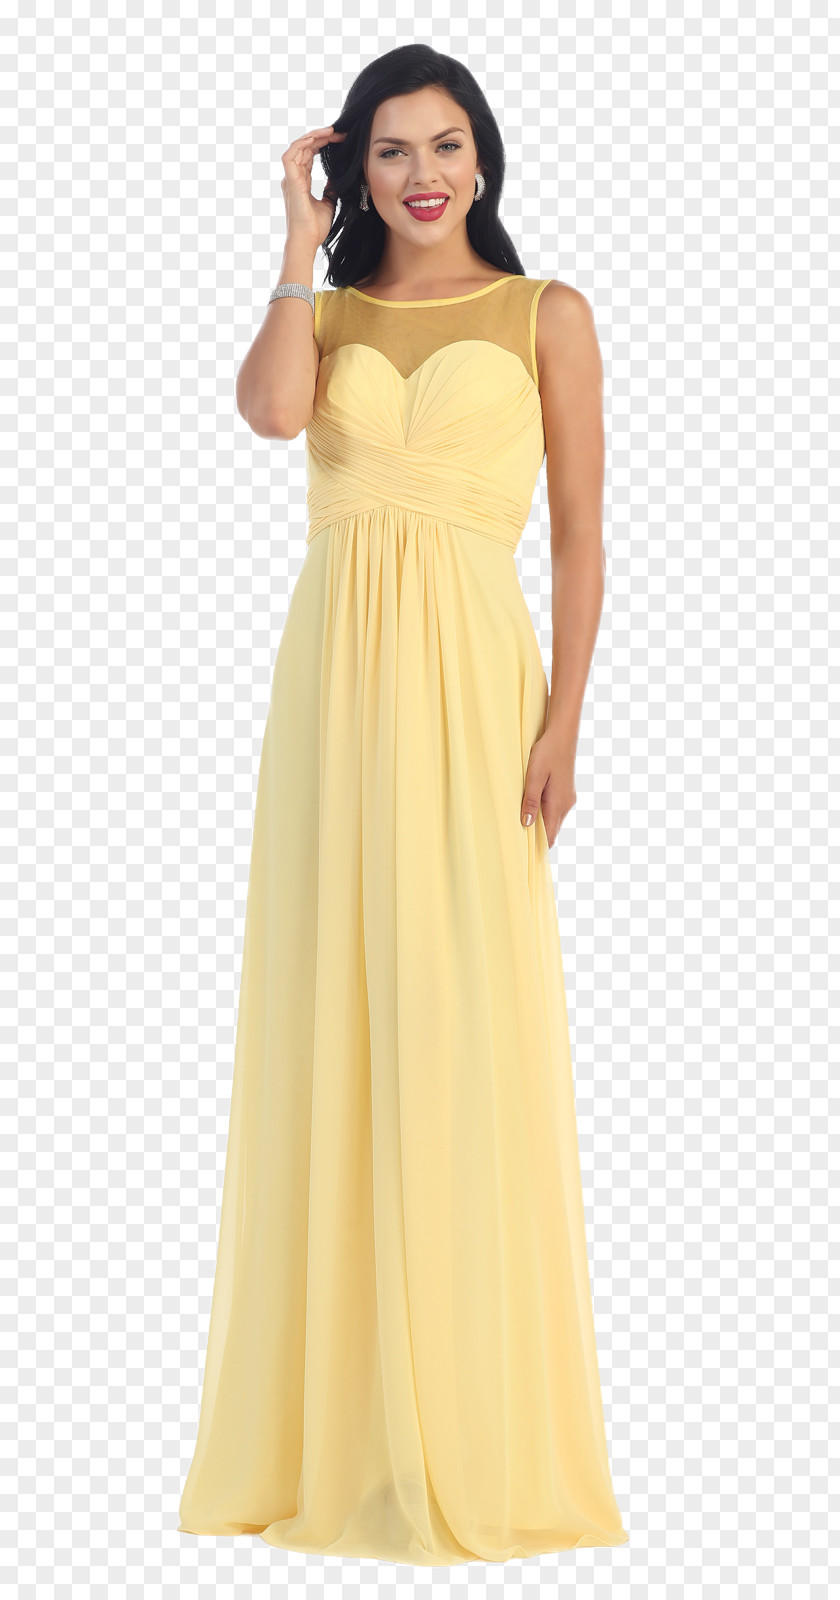 Dress Wedding The Gown Formal Wear PNG